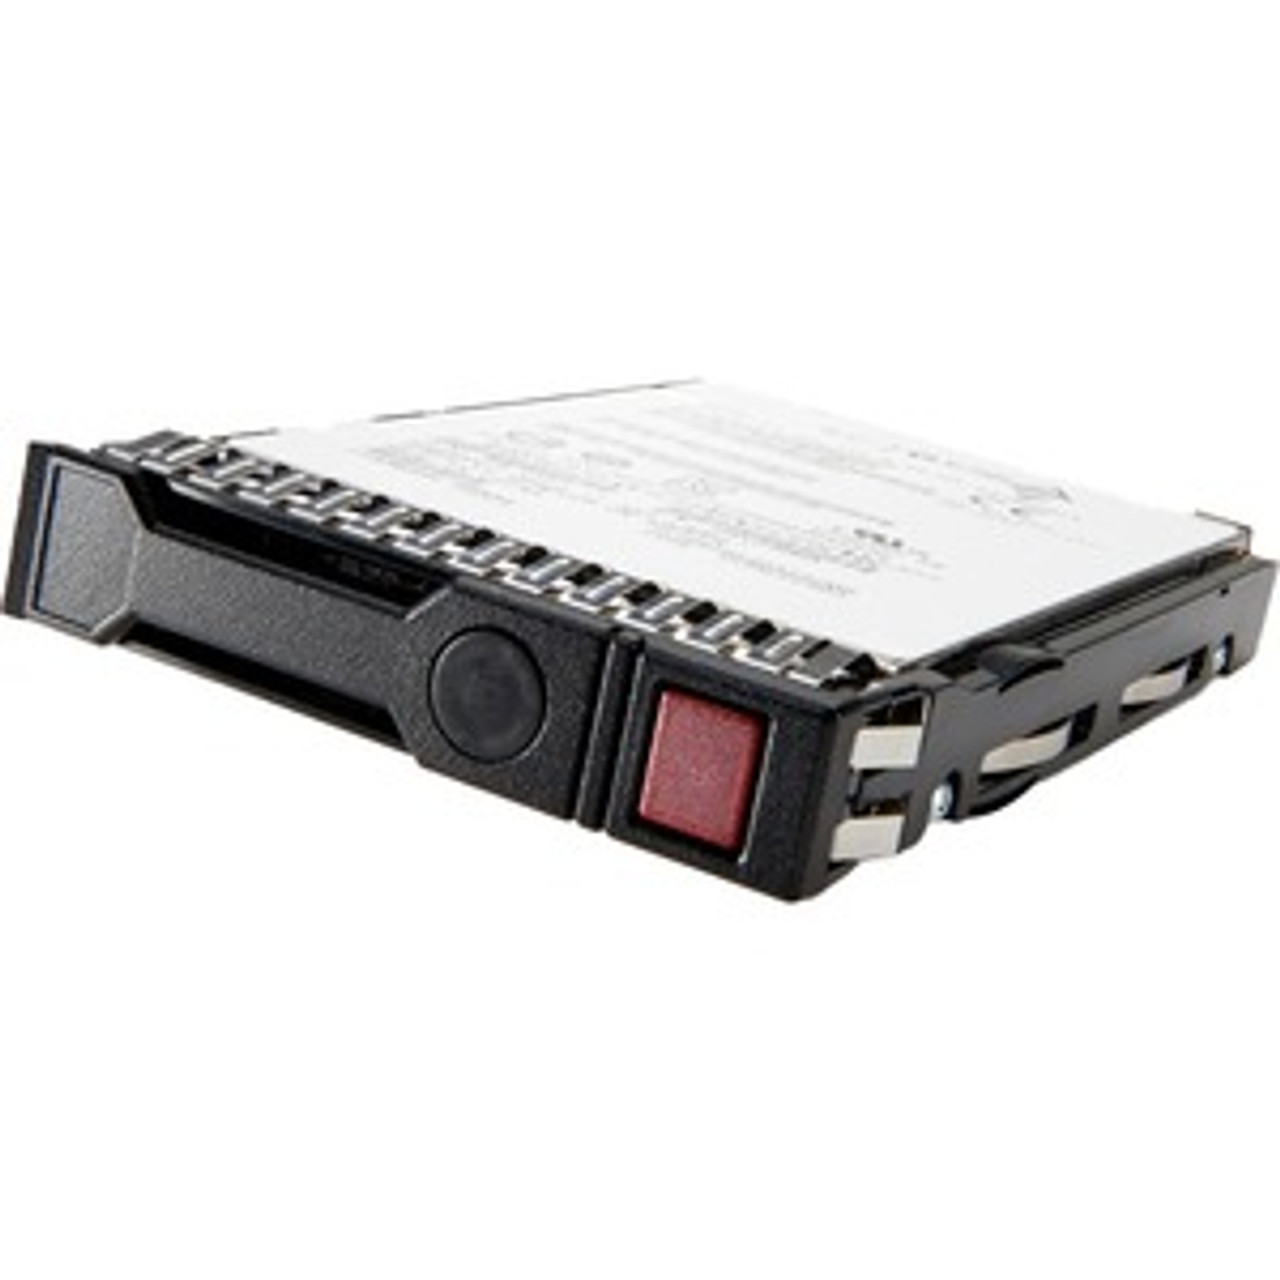 P18434-H21#0D1 HPE 960GB SATA 6Gbps Mixed Use 2.5-inch Internal Solid State Drive (SSD) with Smart Carrier